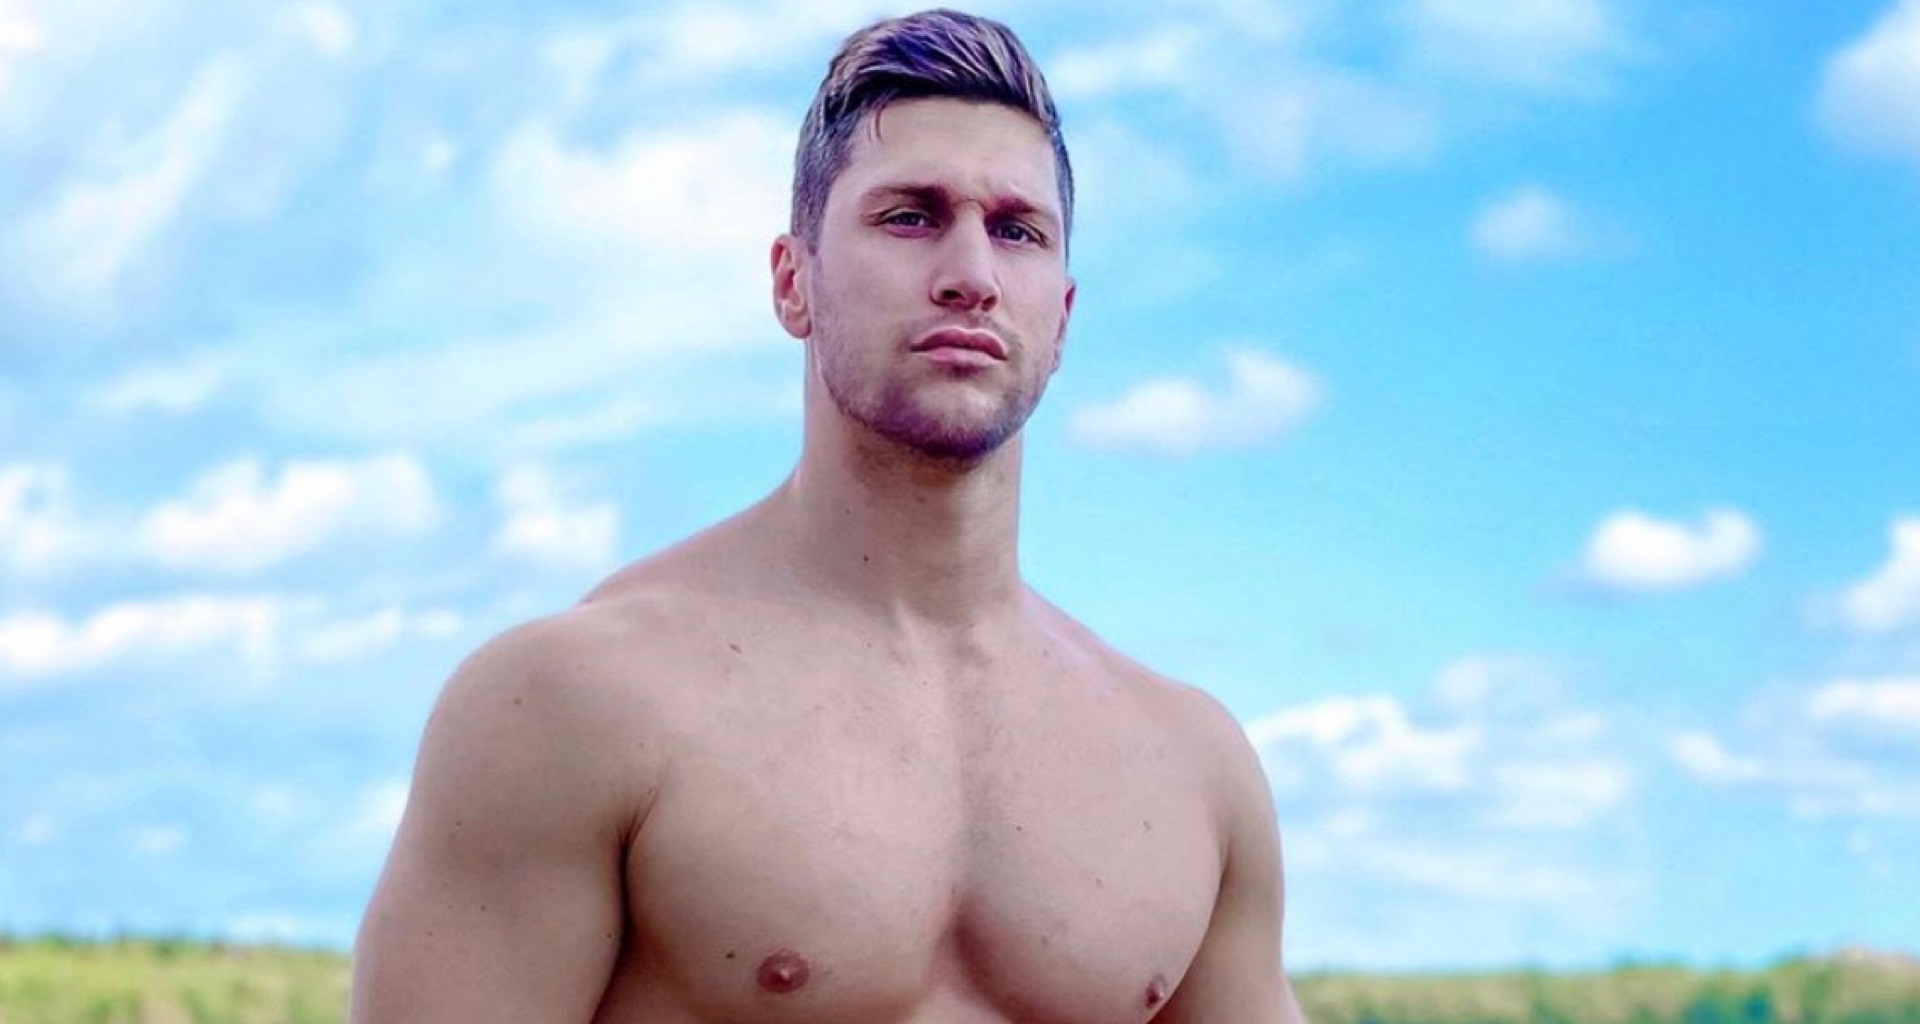 Kyle Hynick puts on an eye-popping display for Box underwear (PICS